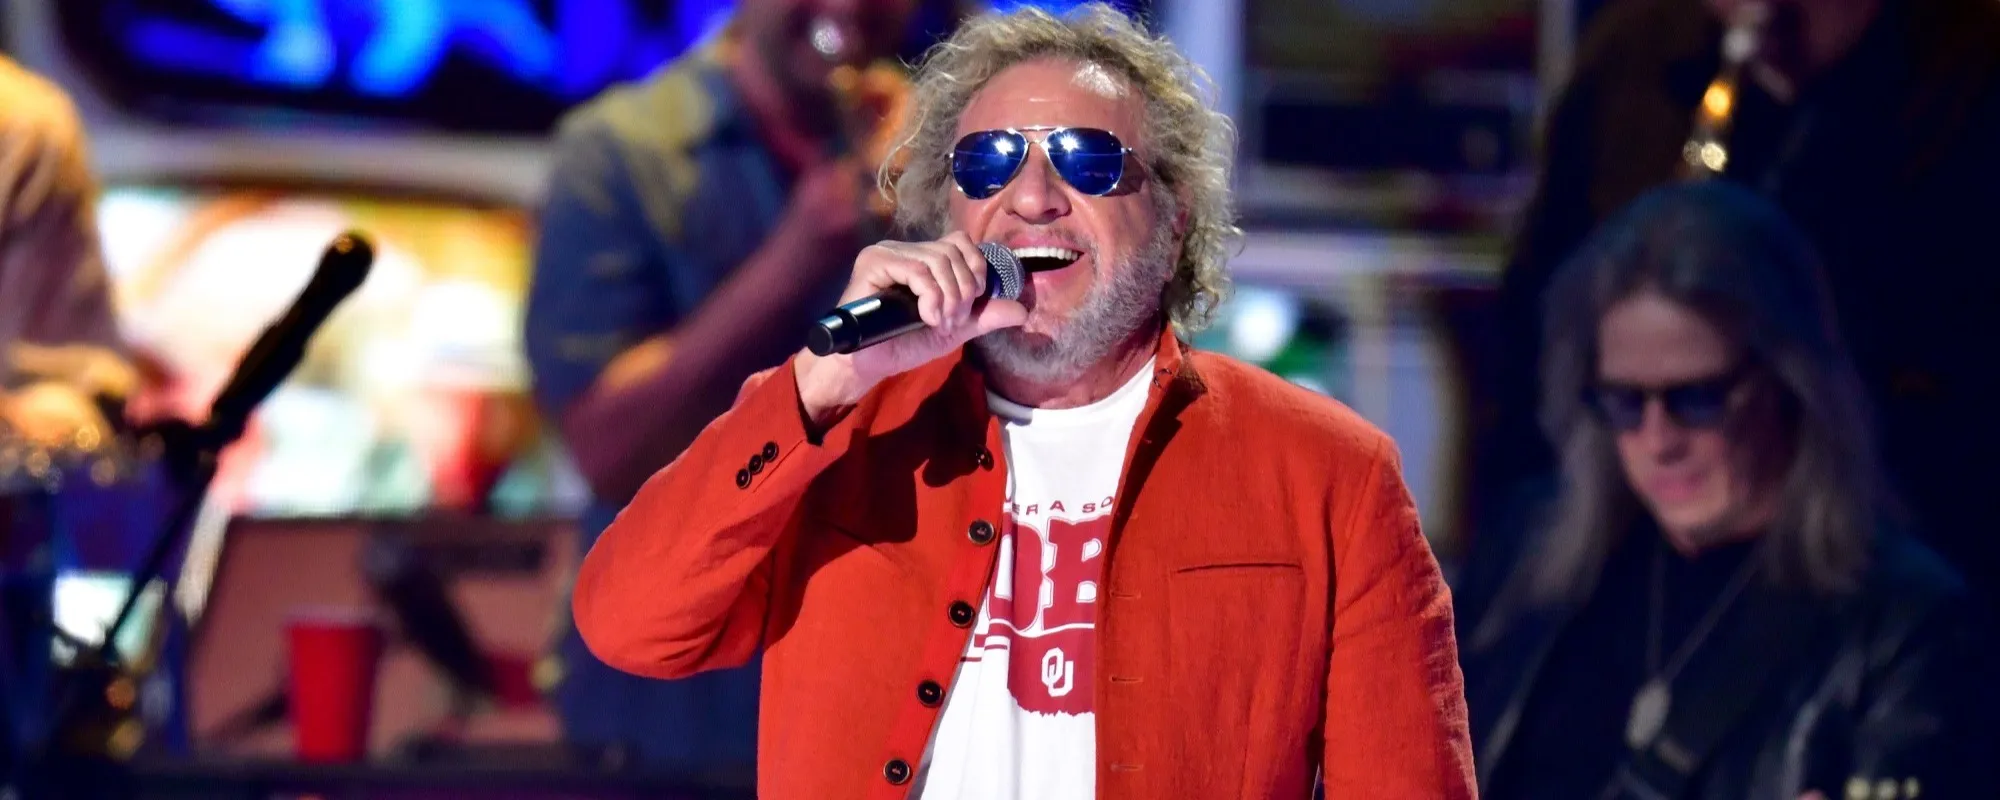 Hollywood “Dreams”: Sammy Hagar to Receive Walk of Fame Star at Ceremony With Guy Fieri, John Mayer, & More